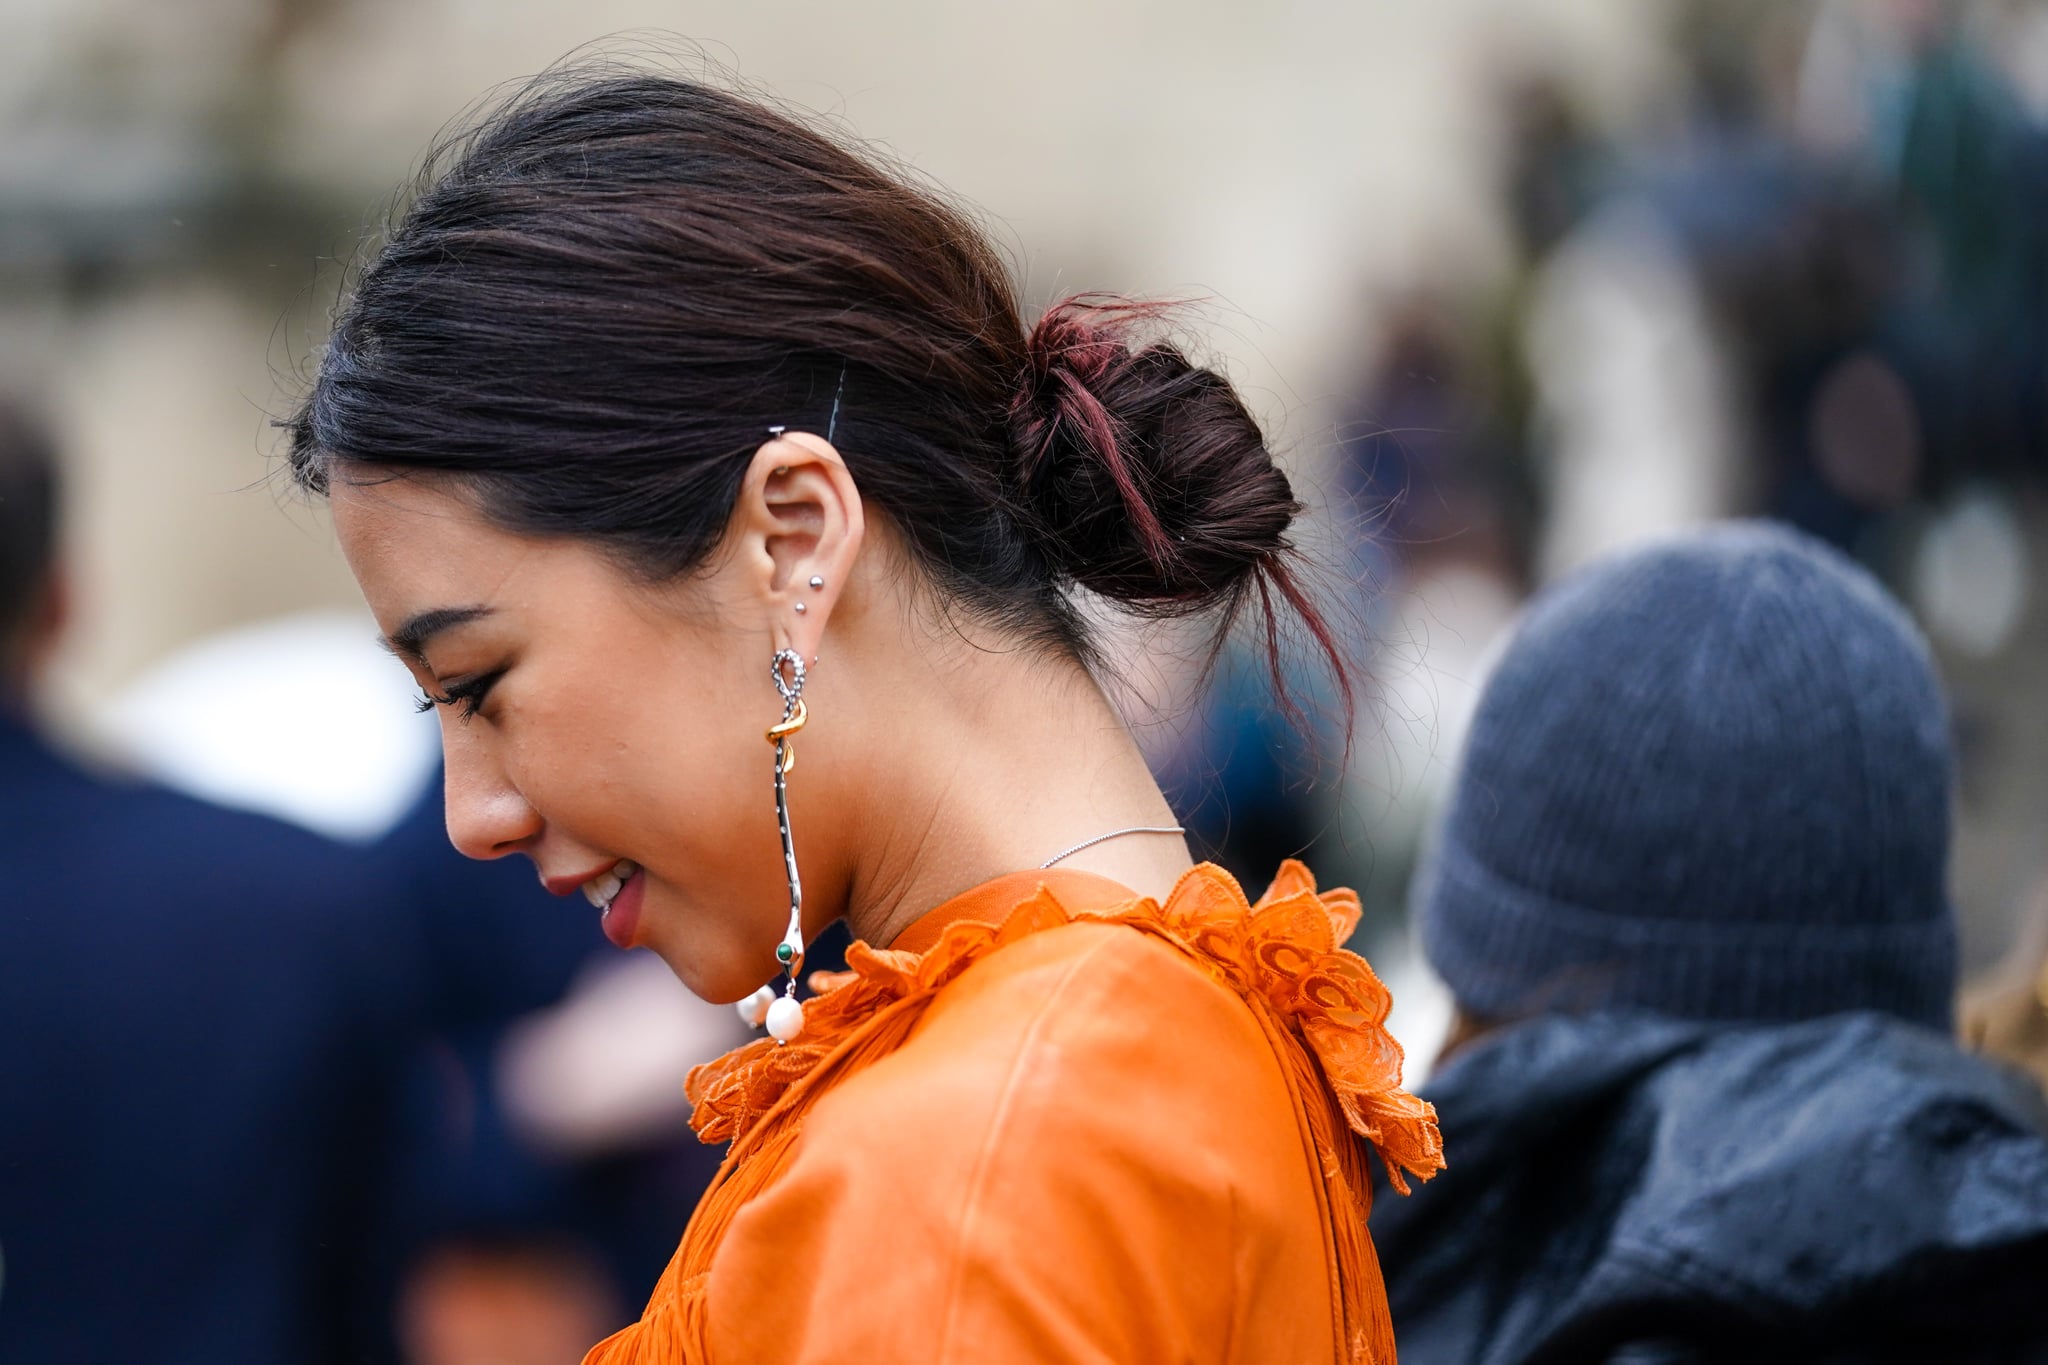 PARIS, FRANCE - FEBRUARY 27: A guest wears an orange dress with embroidery on the collar, long earrings, outside Chloe, during Paris Fashion Week - Womenswear Fall/Winter 2020/2021, on February 27, 2020 in Paris, France. (Photo by Edward Berthelot/Getty Images)